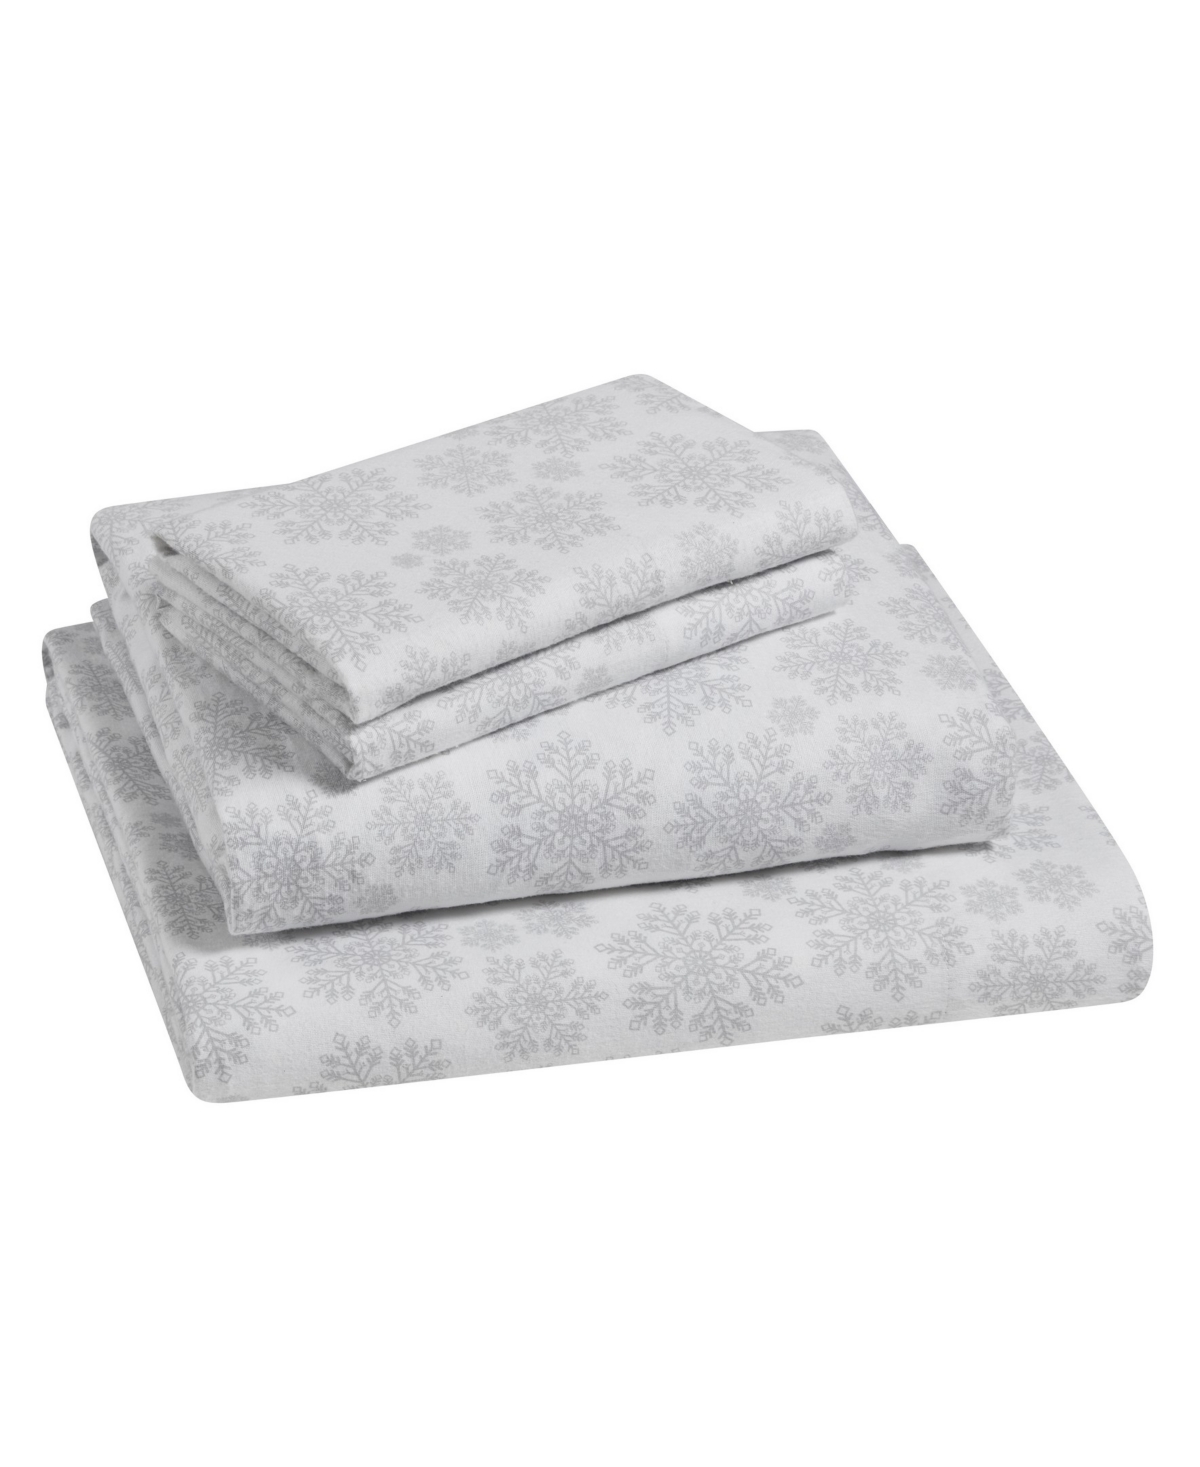 Tahari Home Snowflake 100% Cotton Flannel 4-pc. Sheet Set, Queen In Silver